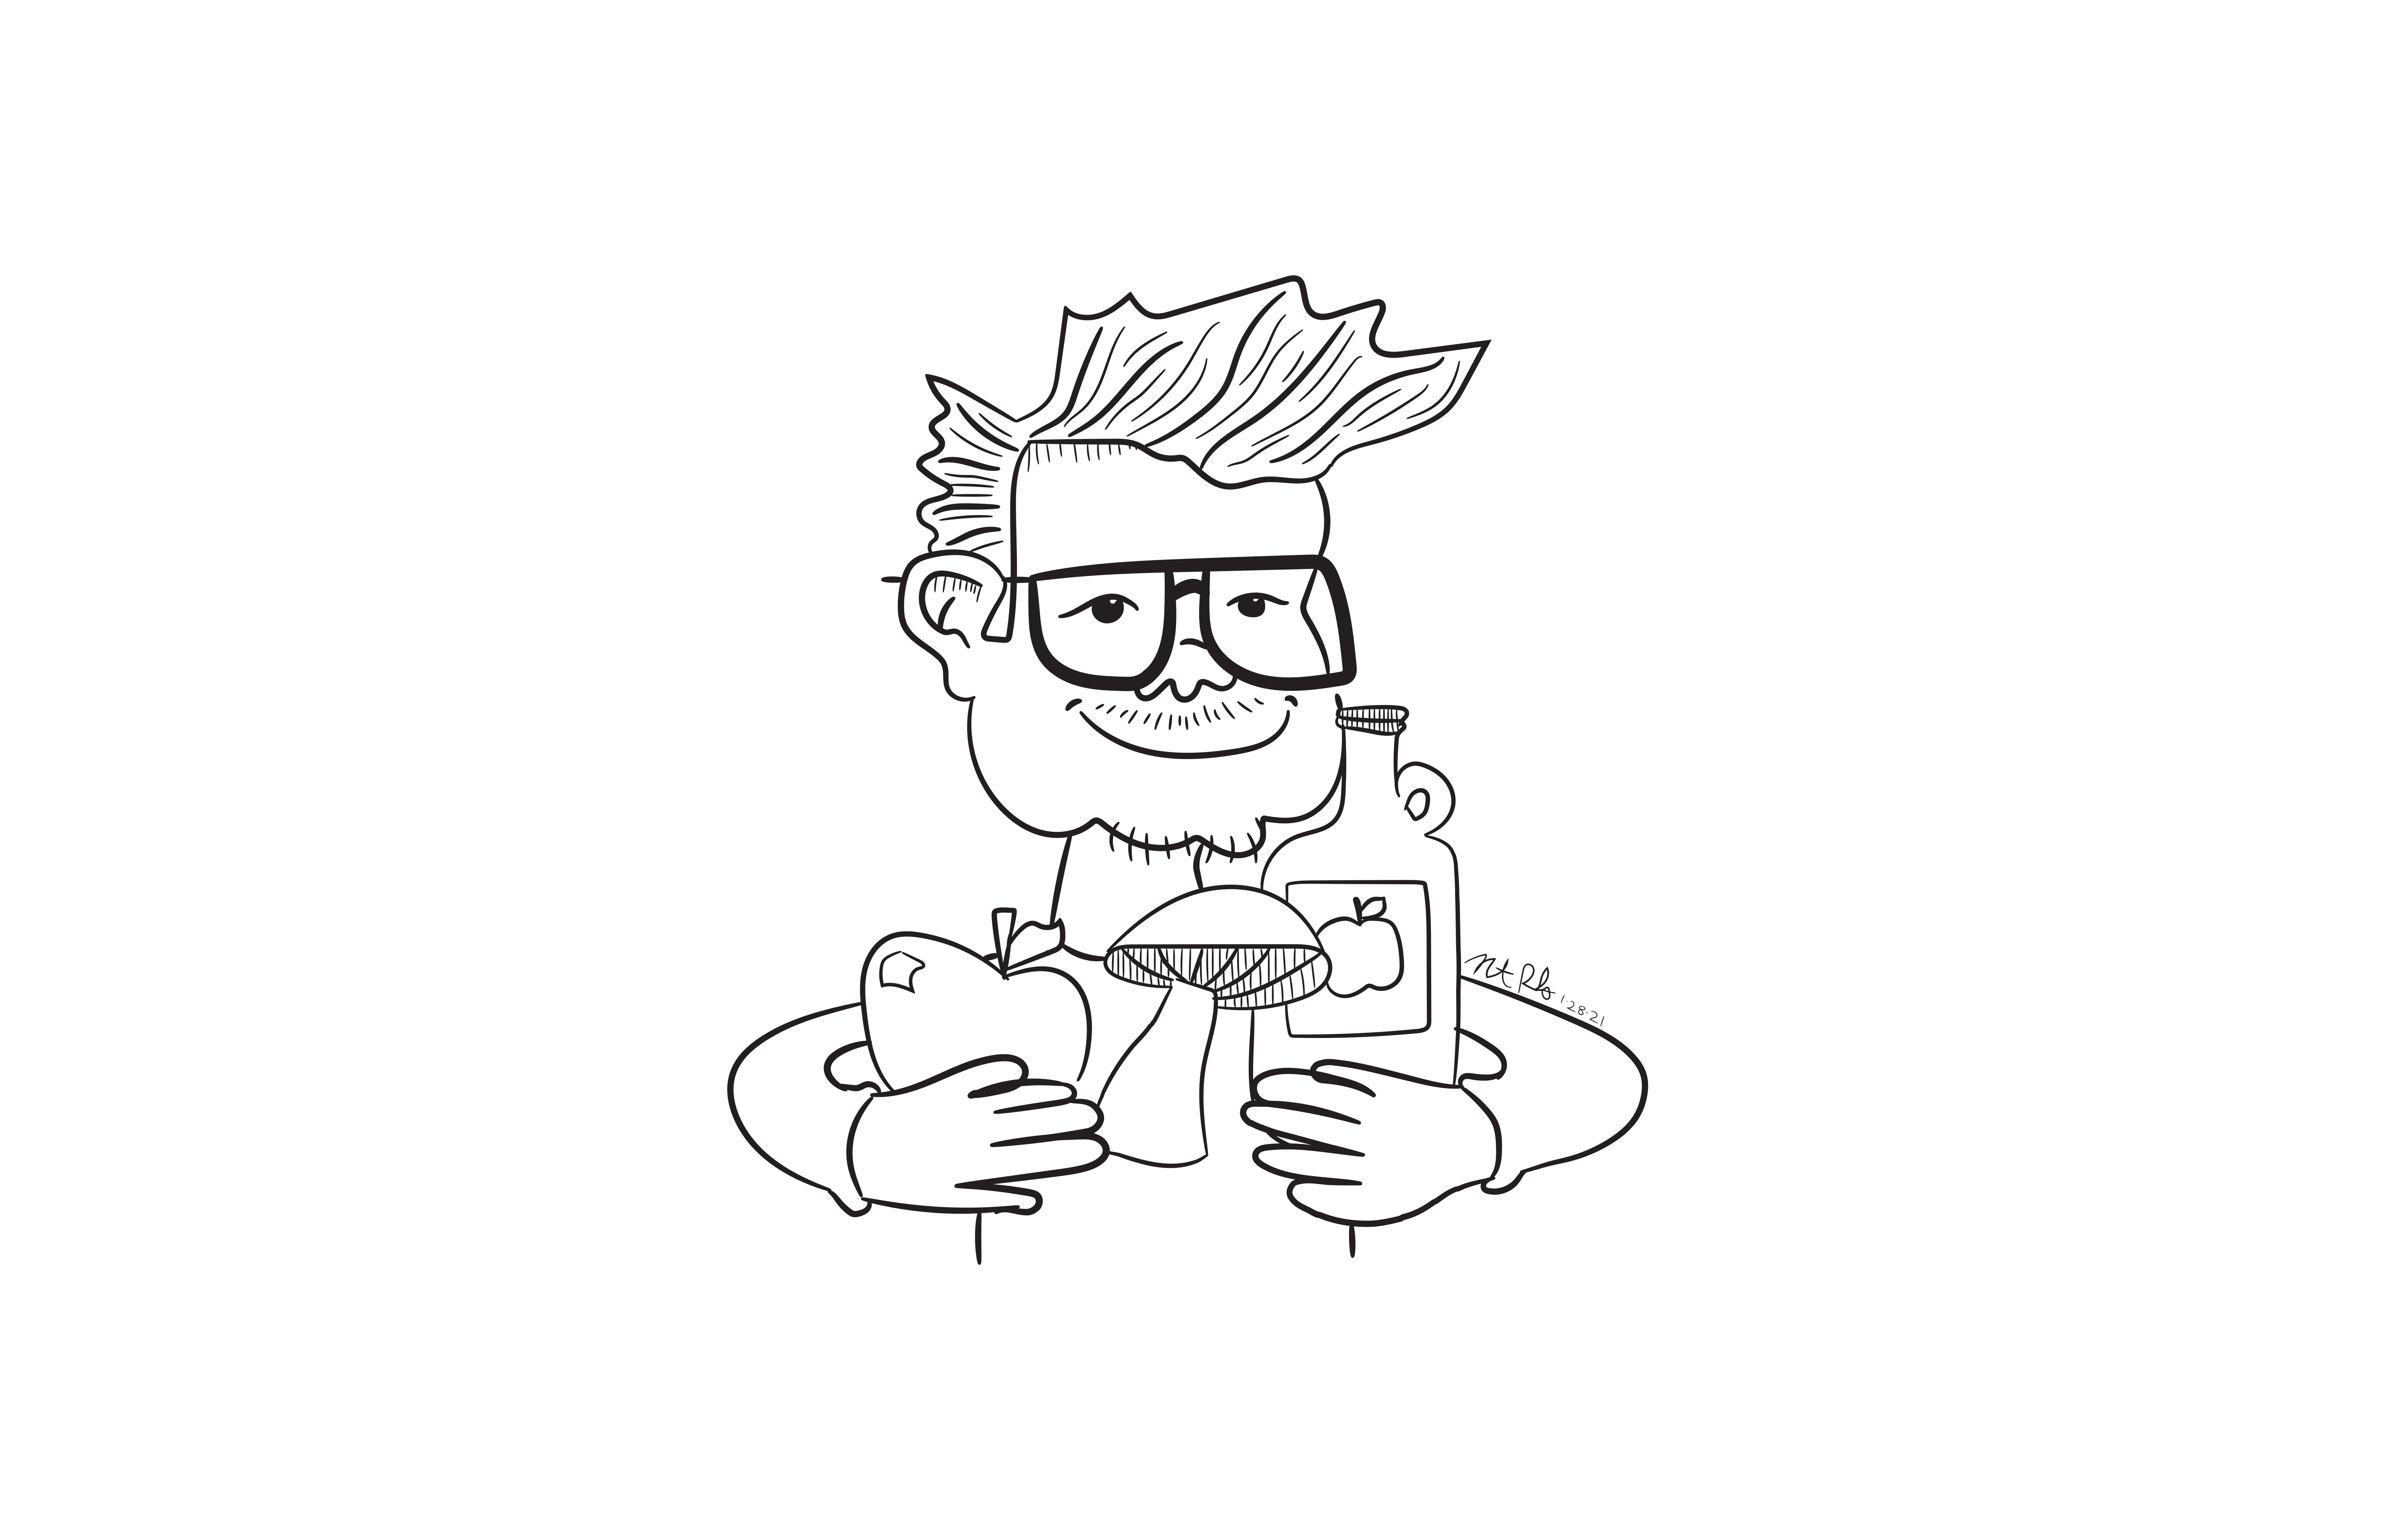 Black and white cartoon drawing of Harrison Gingerich. He is wearing large glasses and is holding an apple, a mushroom, and a jug of apple juice